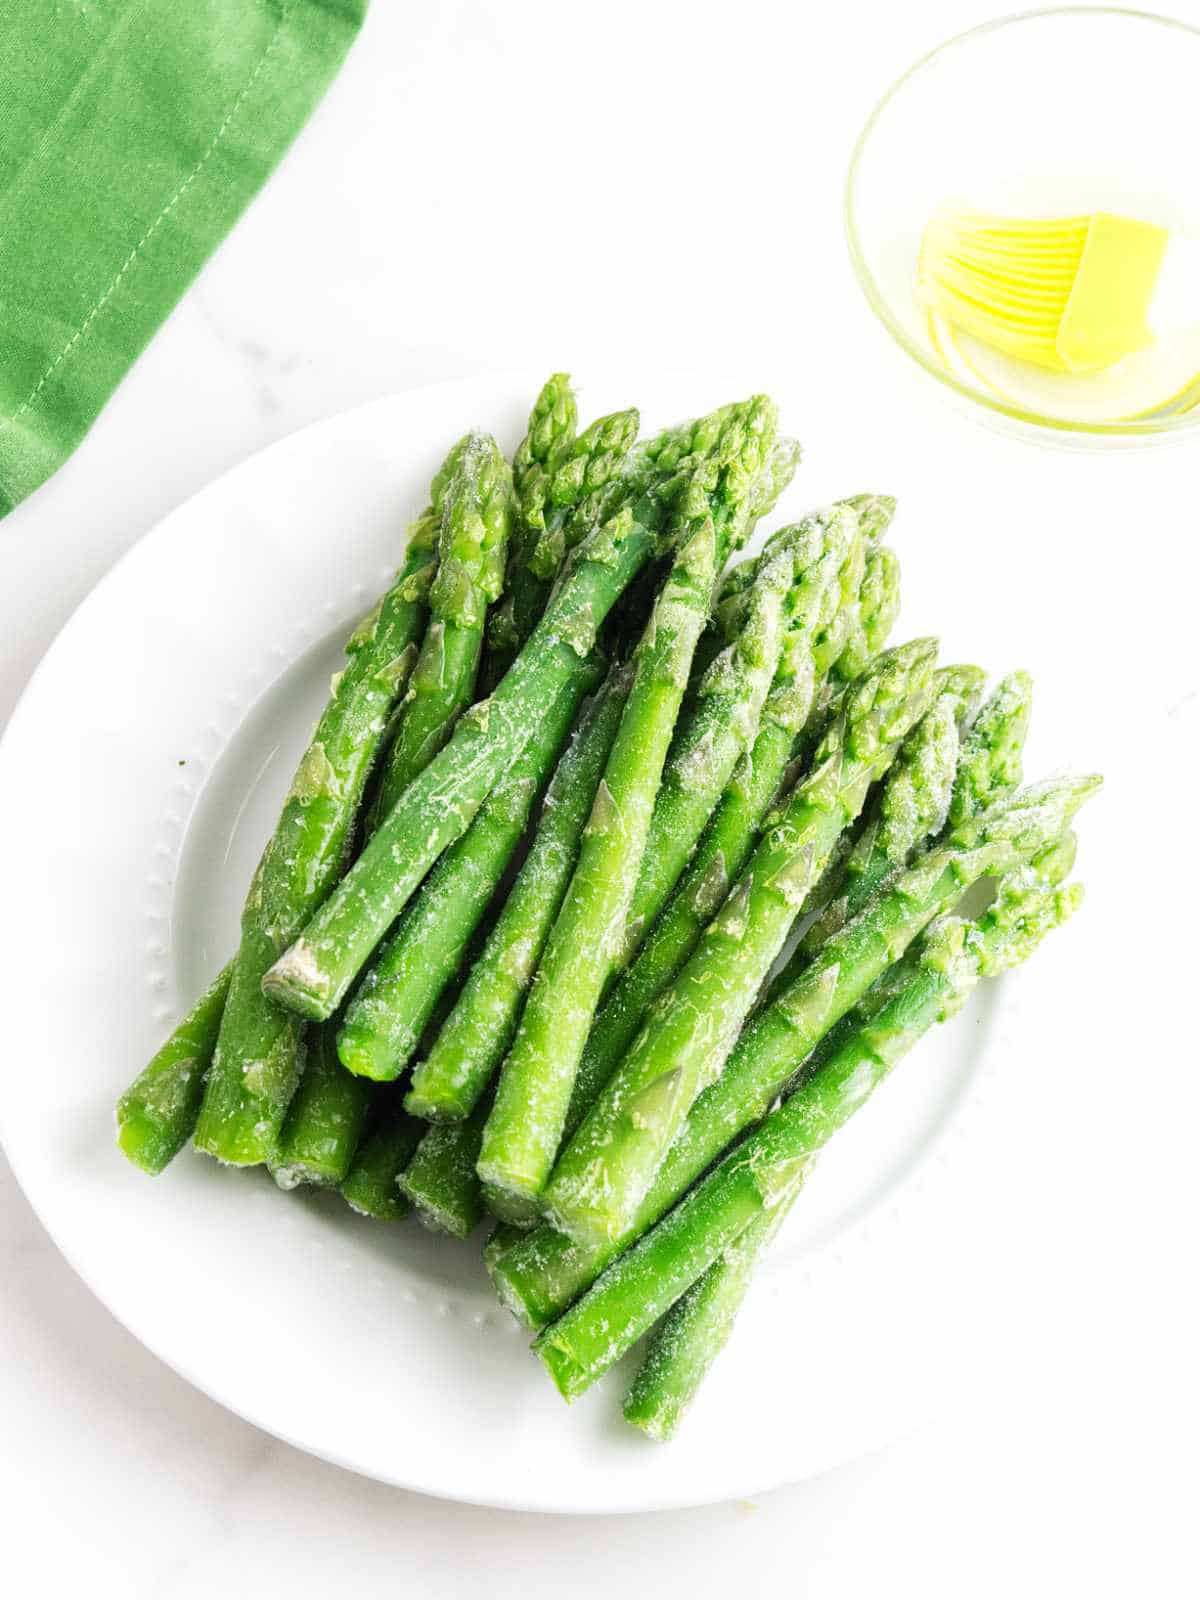 frozen spears of asparagus on a plate with a small bowl of olive oil nearby.